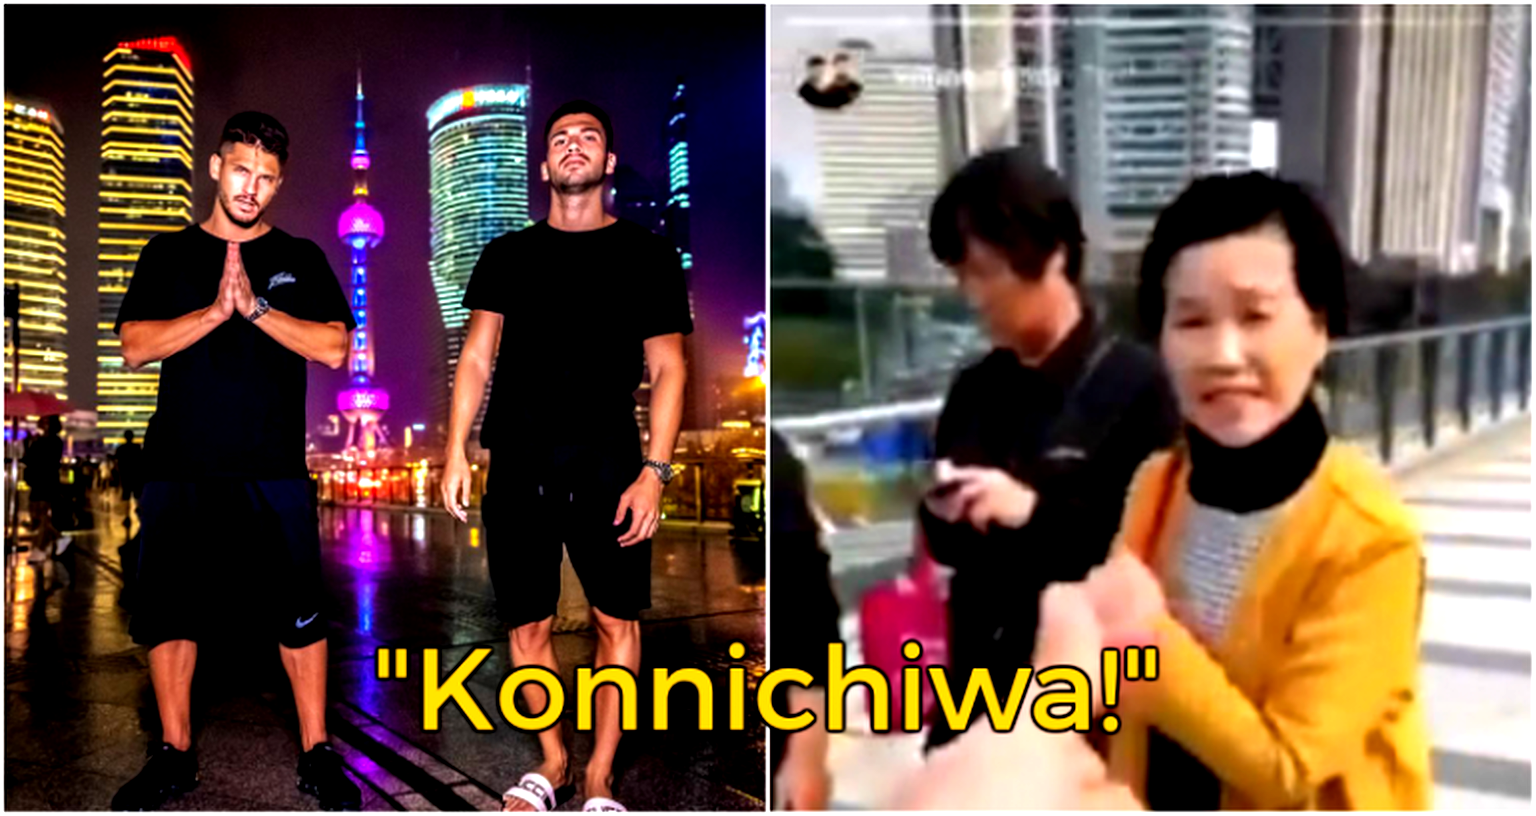 EDM Duo Mocks Passersby in Taipei and Shanghai With Fake Chinese Accent